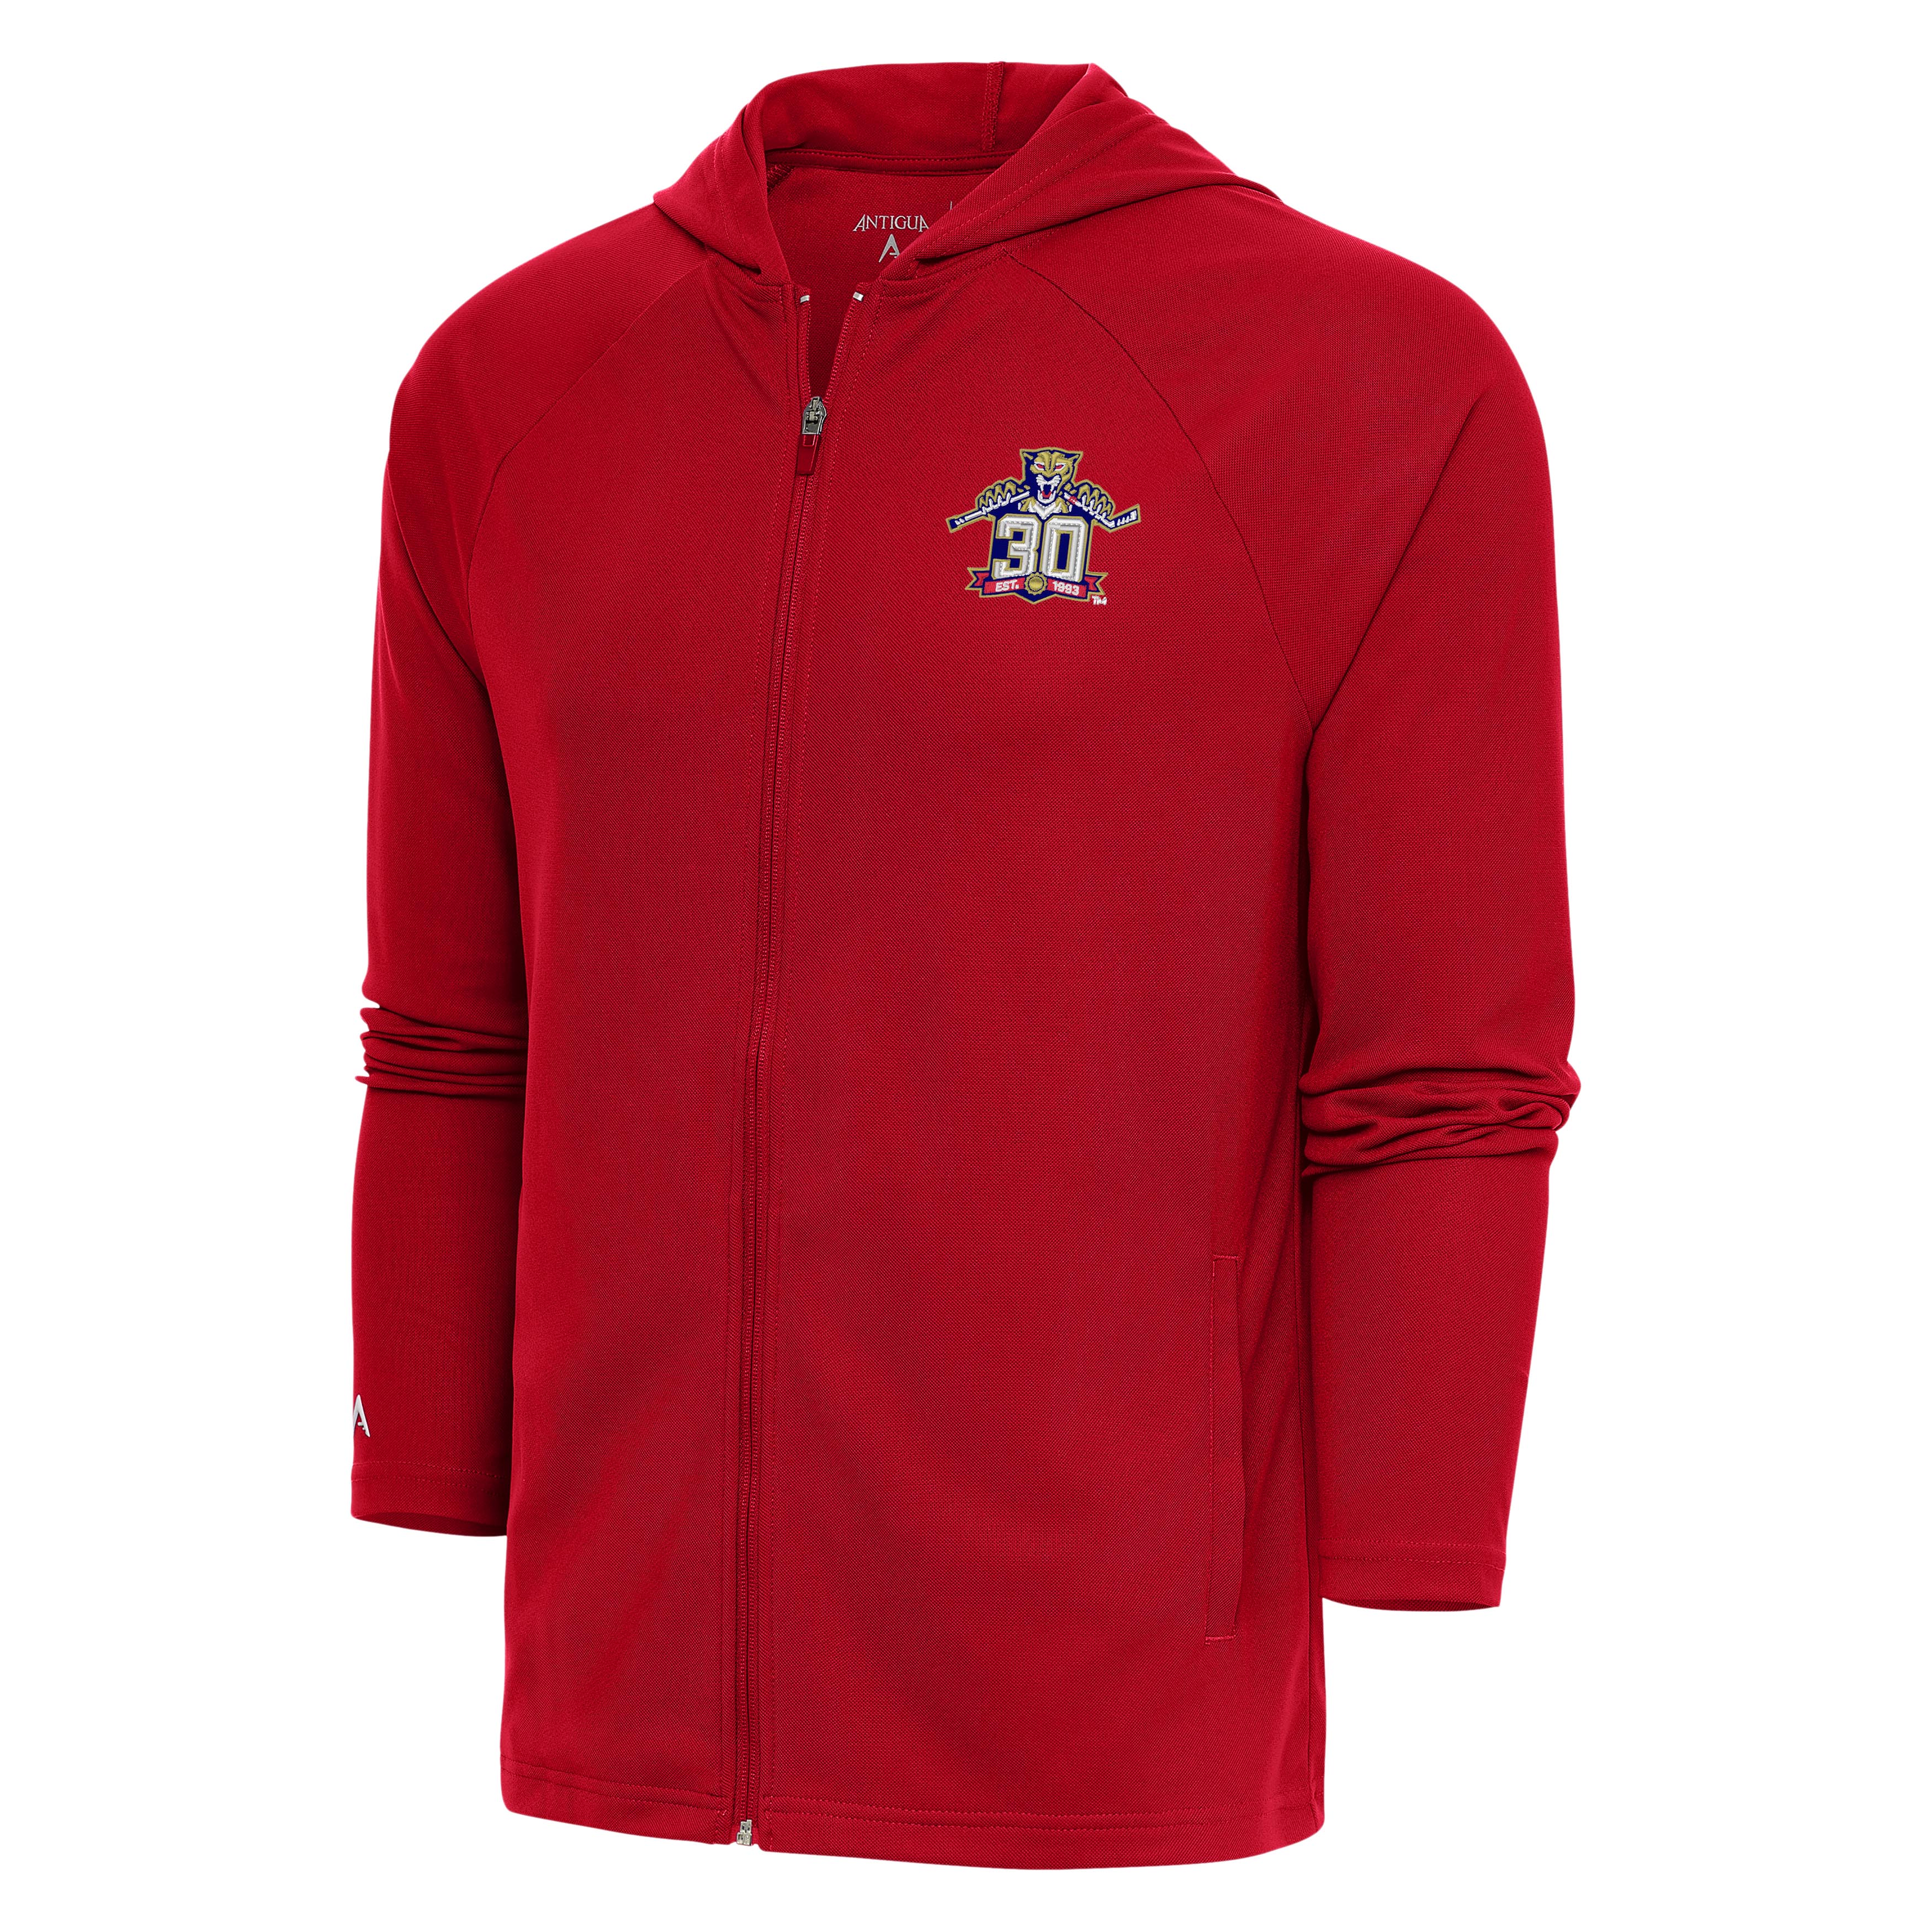 Florida Panthers Antigua Legacy L/S Full Zip Hoodie 30th Anniversary Logo - Red